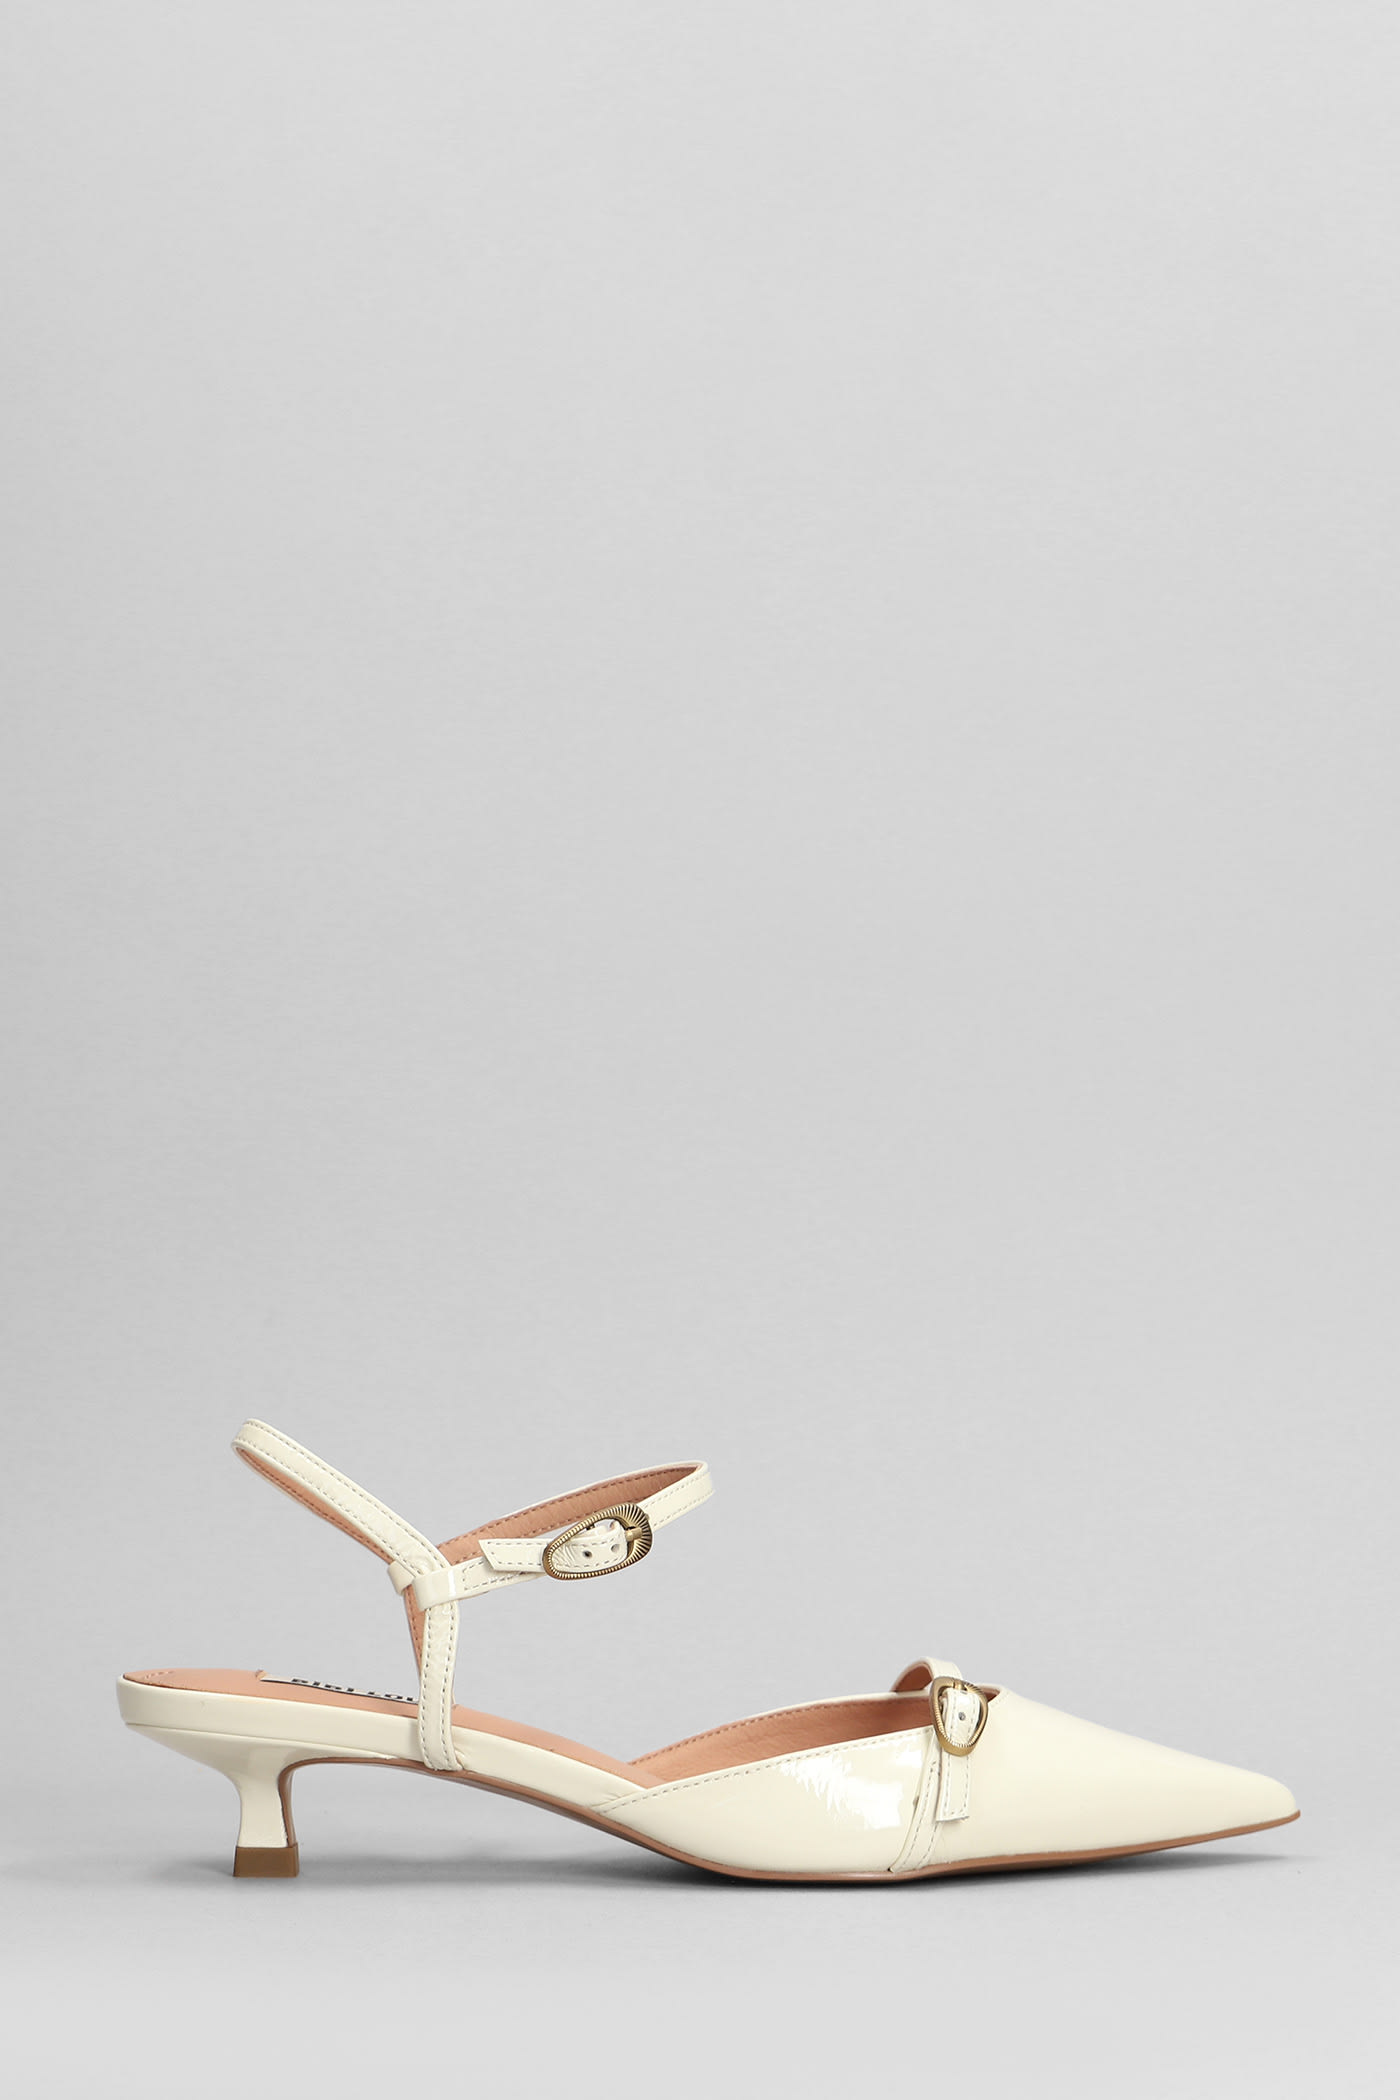 Linda 40 Pumps In White Patent Leather